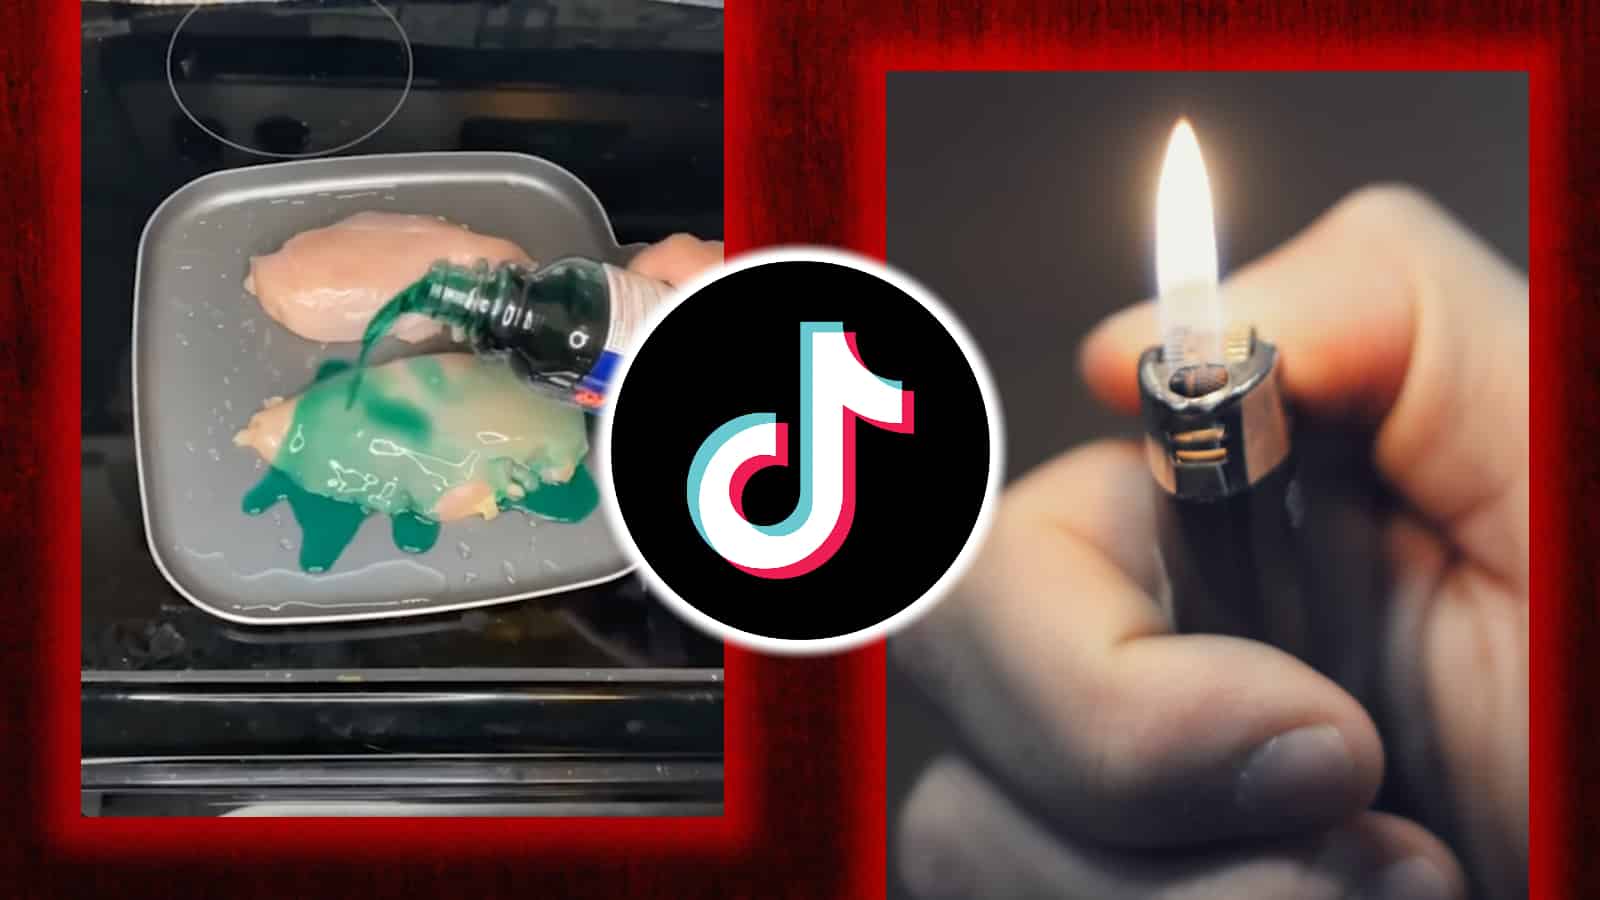 Nyquil chicken trend next to a lighter and the TikTok logo